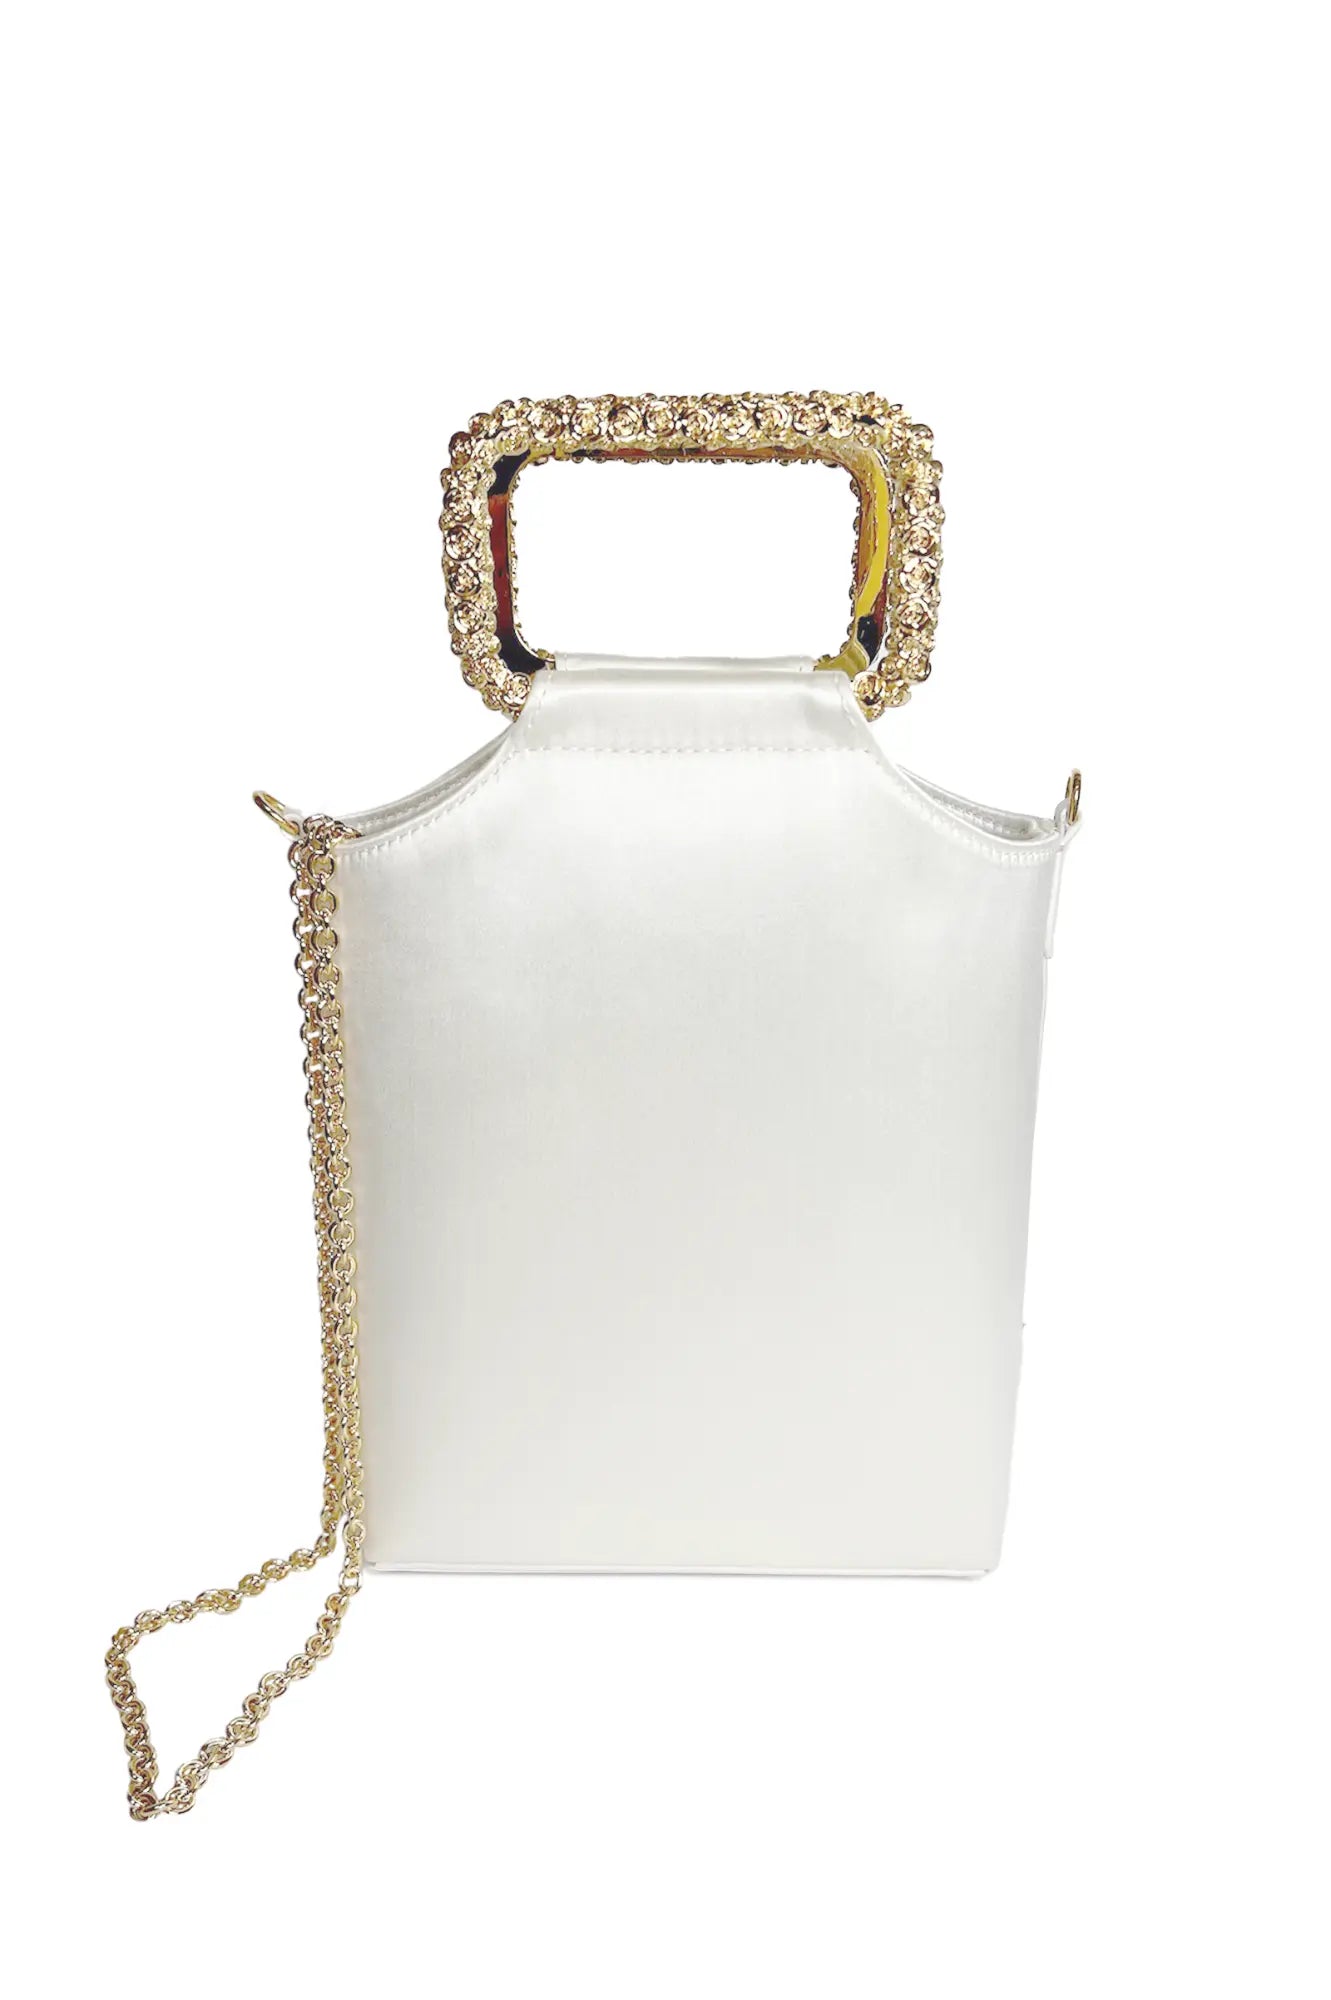 A Bettina Handbag Ivory, from The Bella Rosa Collection, crafted from Italian Duchess Satin with a jeweled handle and chain strap, on a white background.